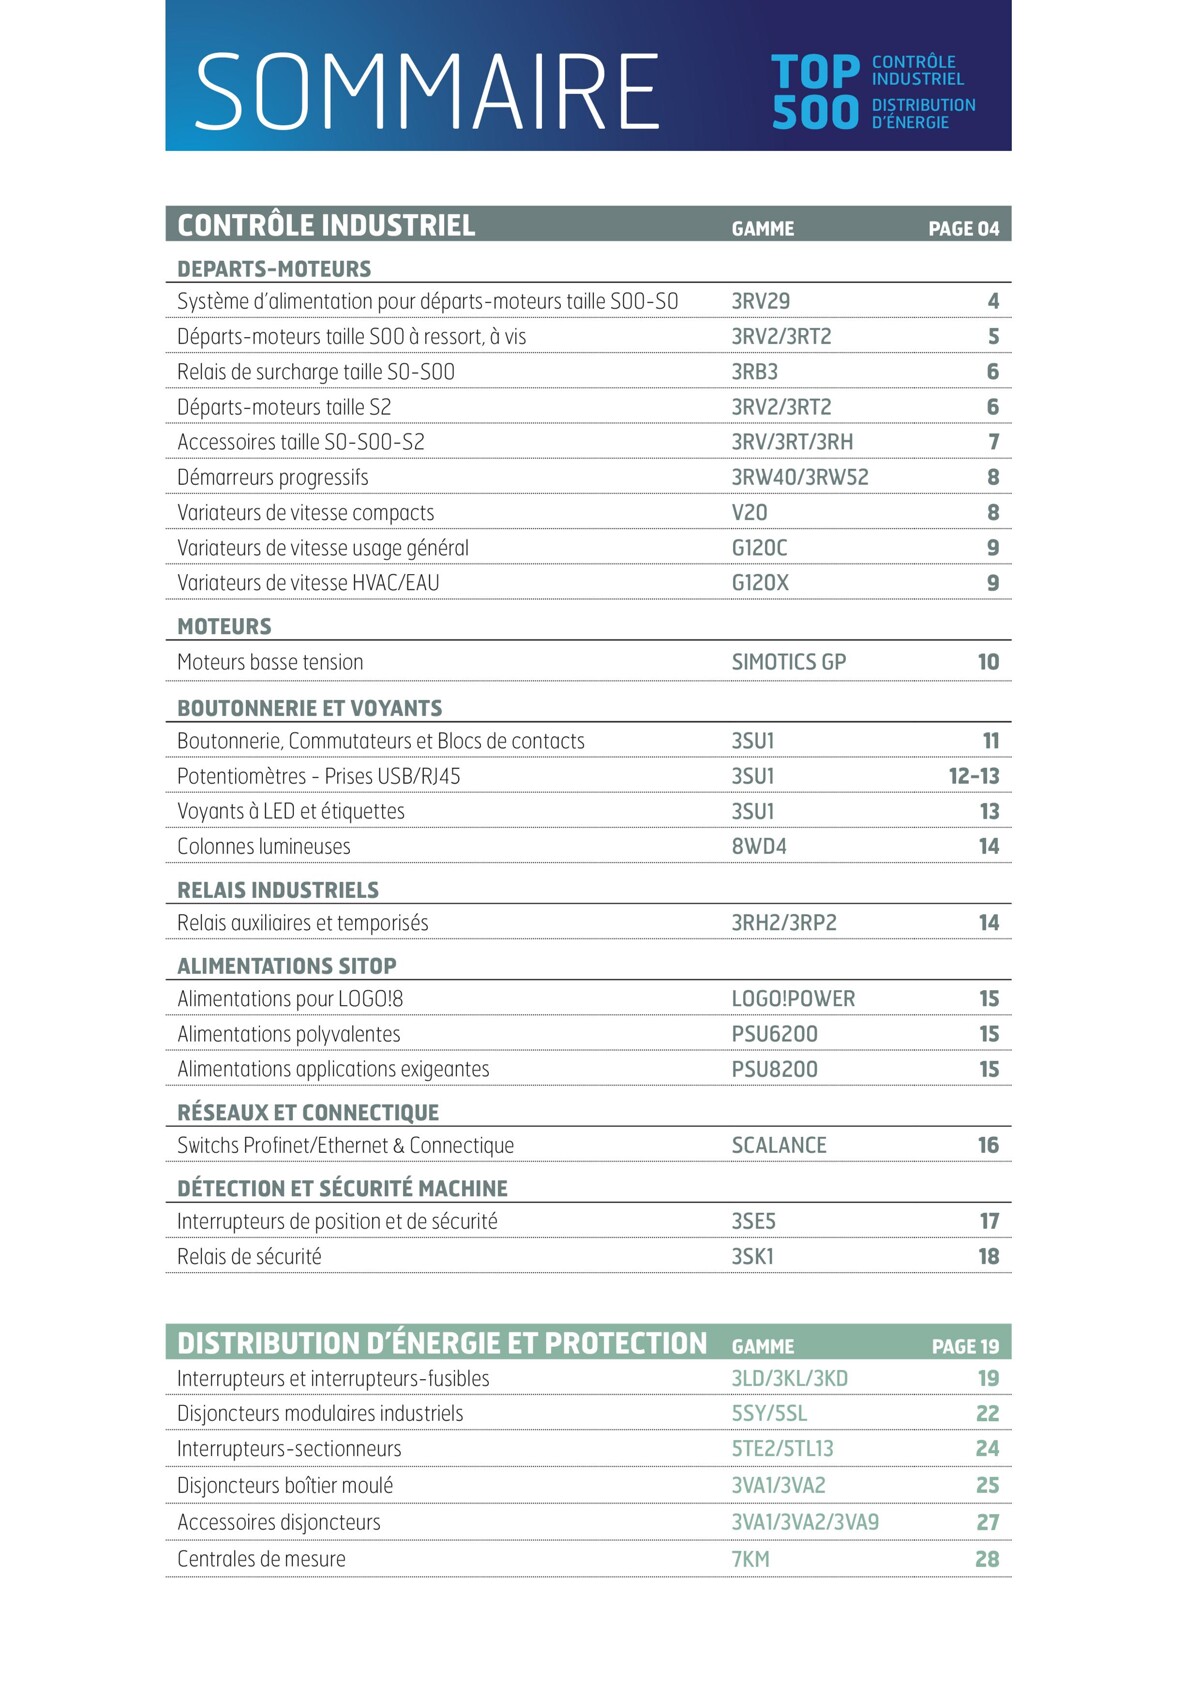 Catalogue TOP 500 siemens - Rexel, page 00003